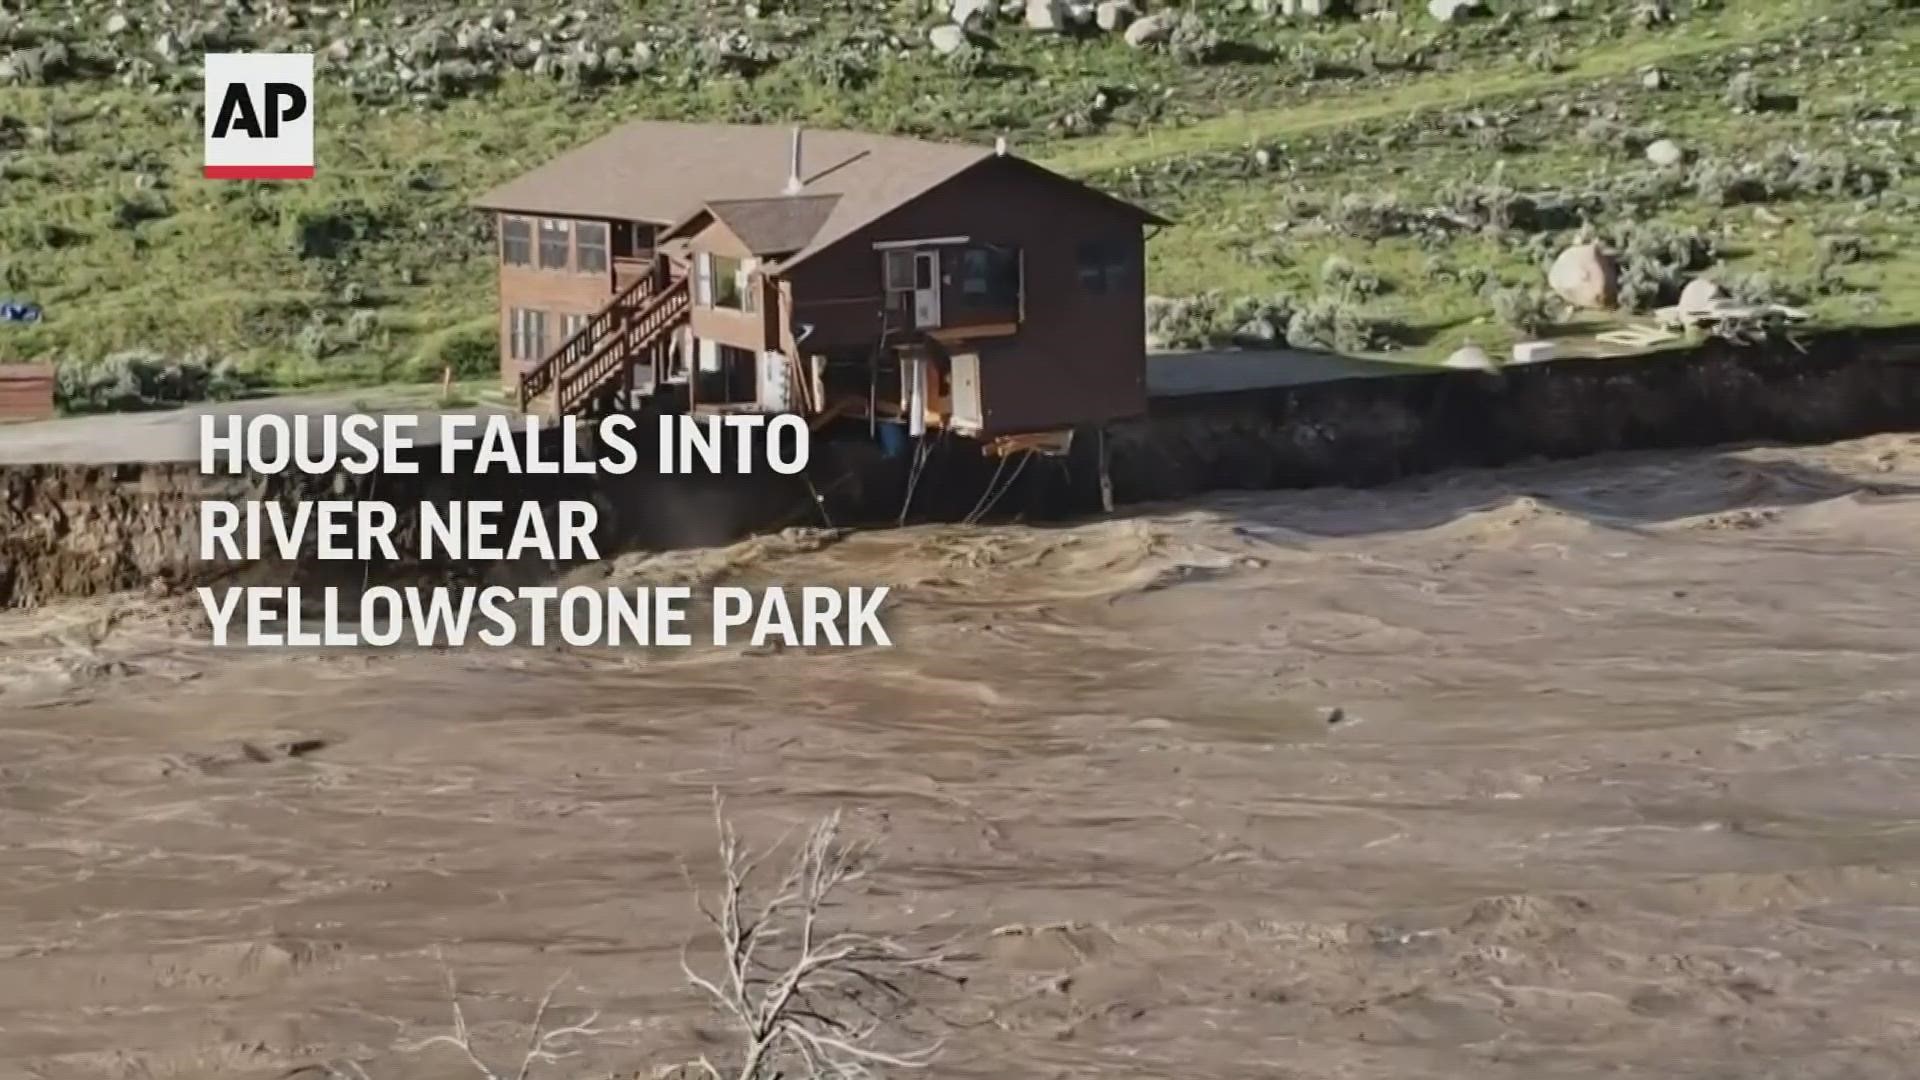 On Monday evening, rushing waters undercut a riverbank, causing a house to fall into the Yellowstone River and float away mostly intact.